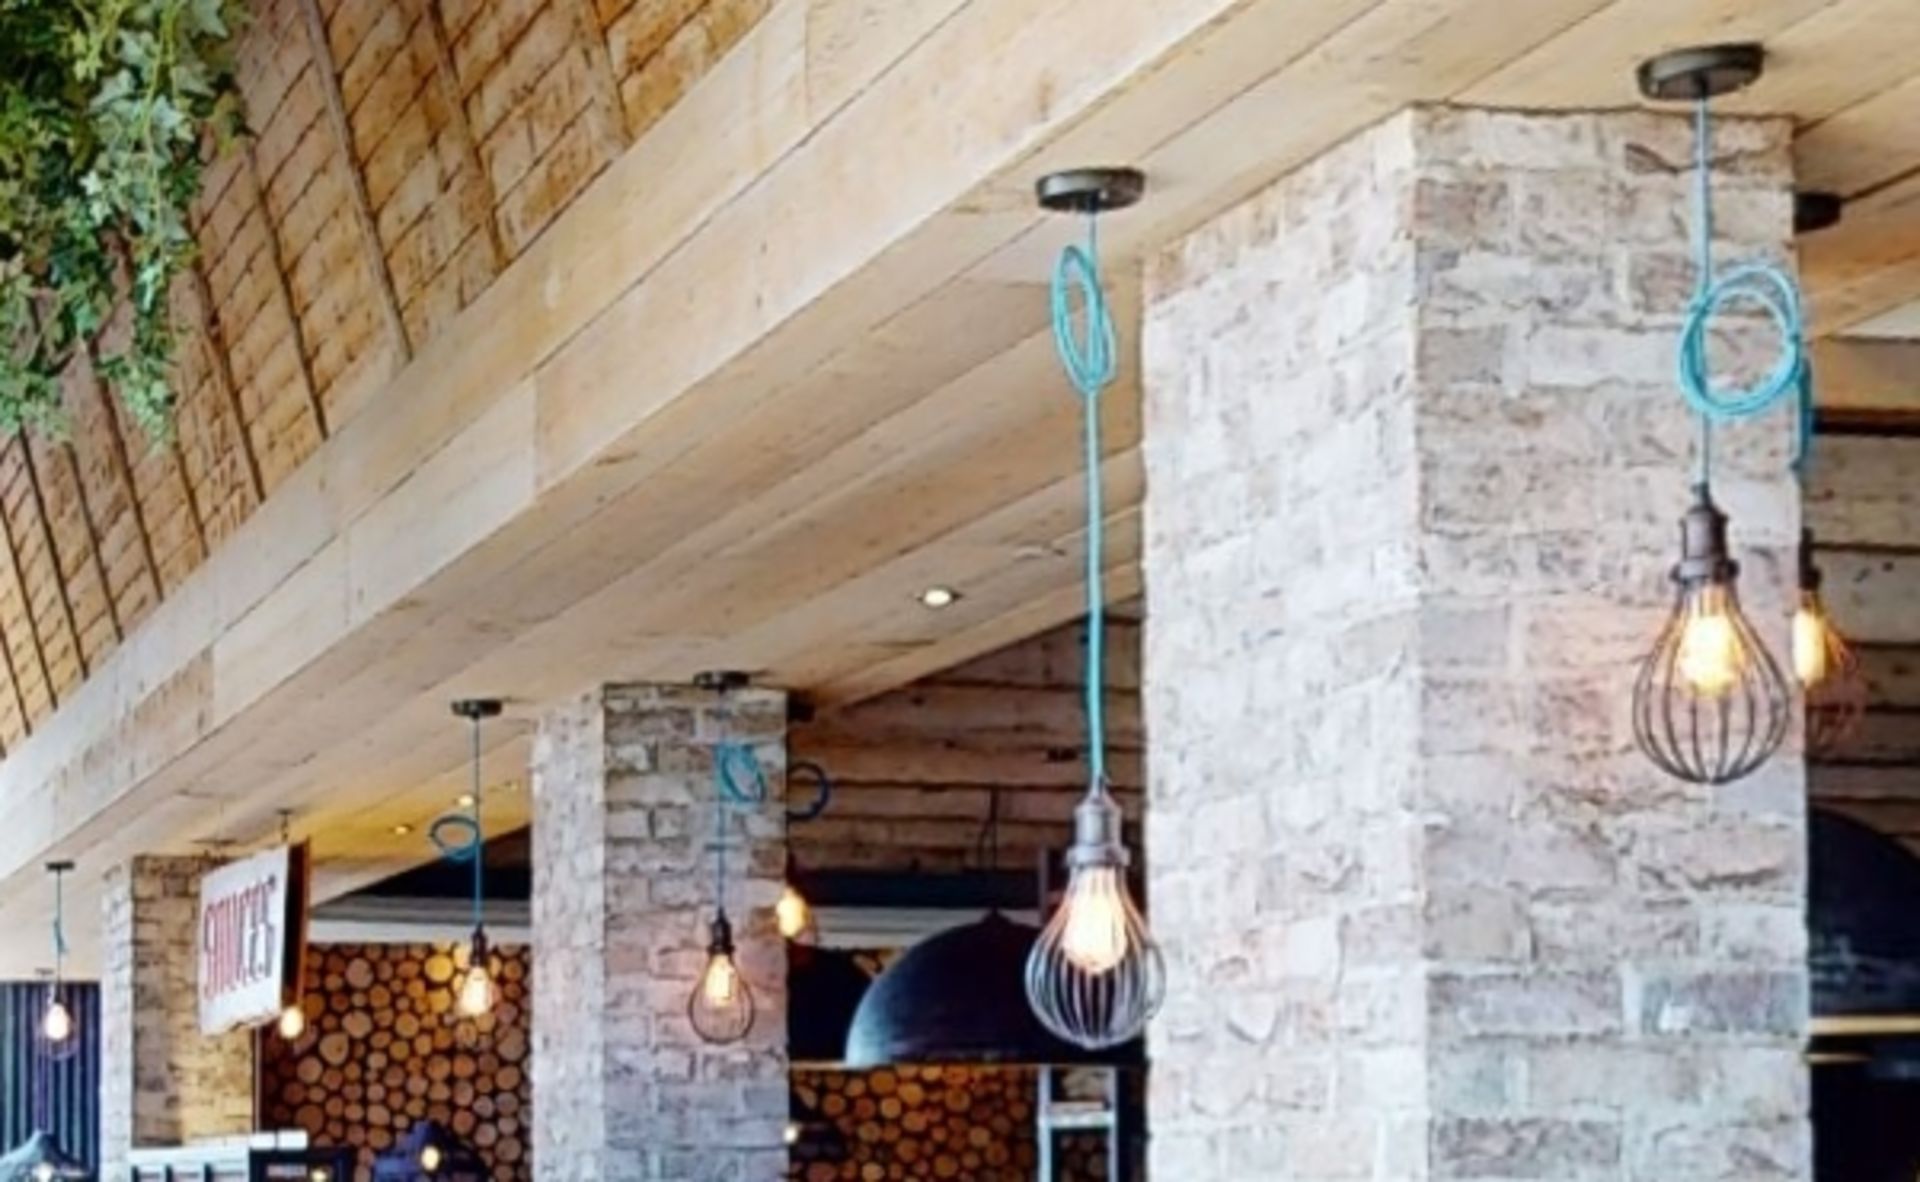 6 x Suspended Rope Lights With Blue Rope Cable, Antique Copper Cage Pendants and Ceiling Mounts - Image 7 of 7